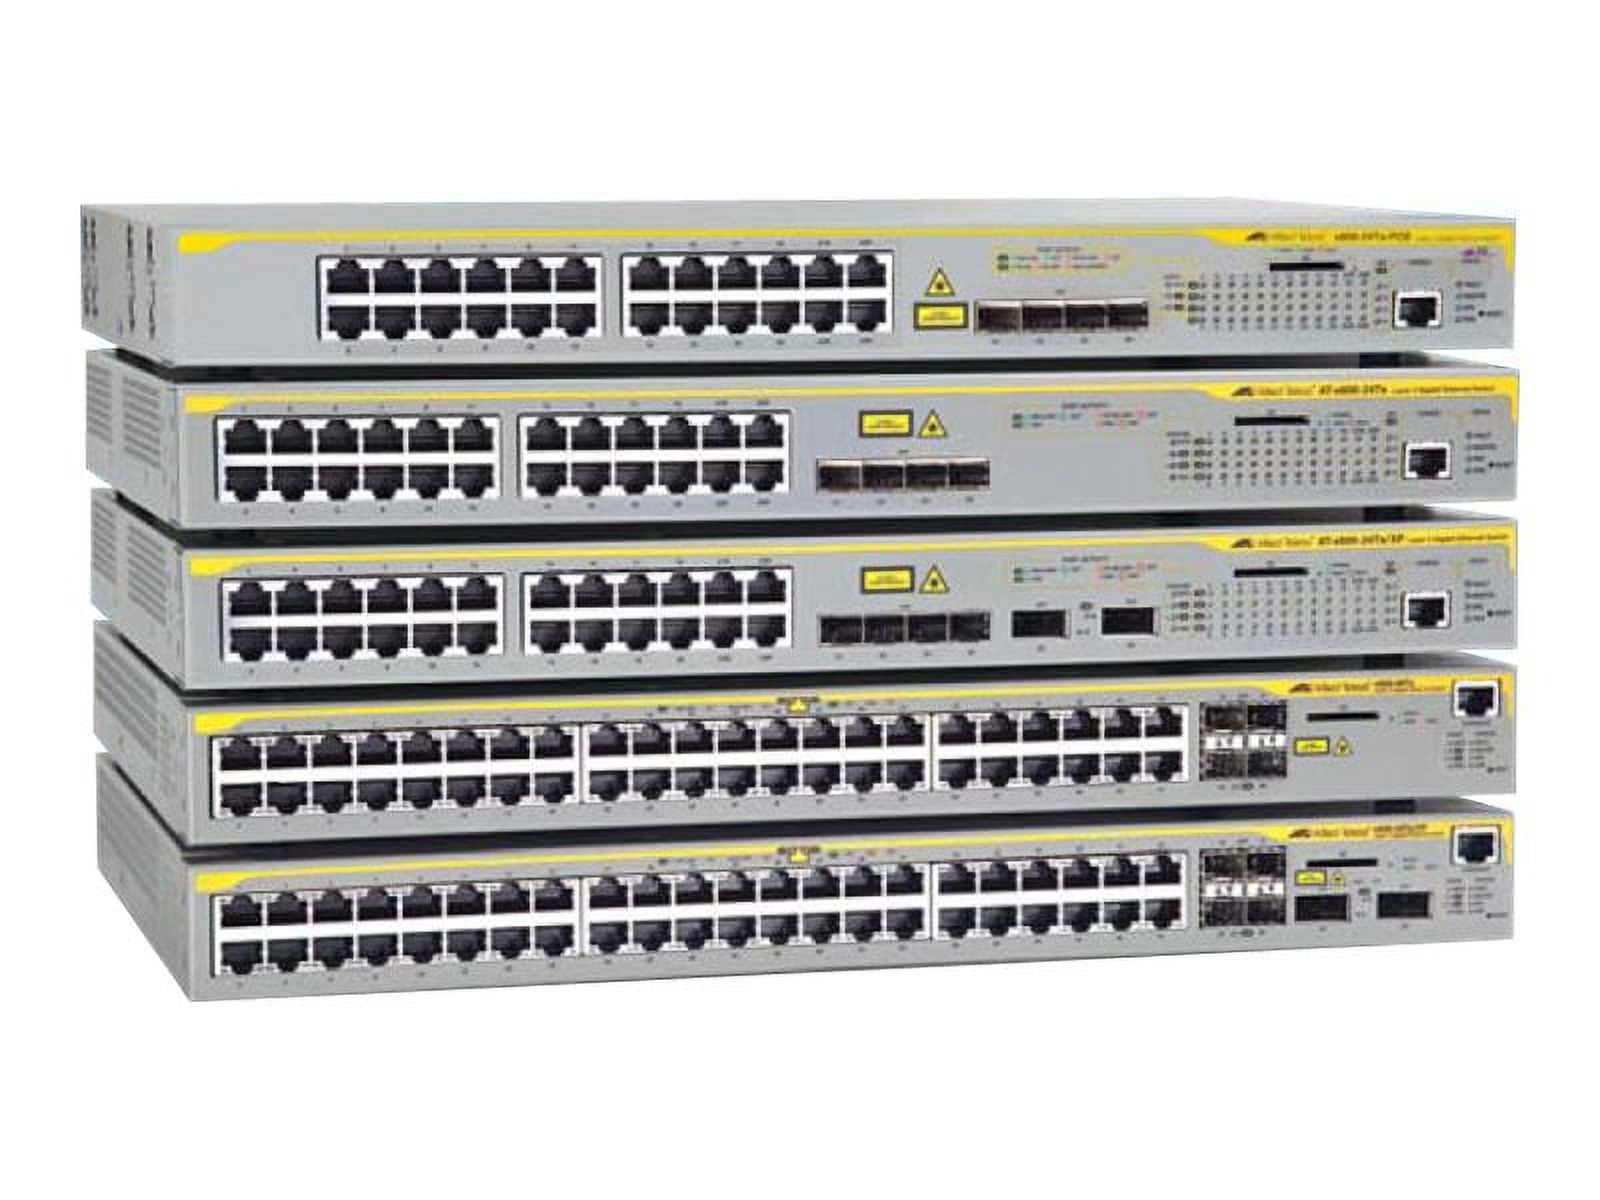 Allied Telesis AT x610-24Ts/X - switch - 24 ports - managed - rack-mountable - image 5 of 6